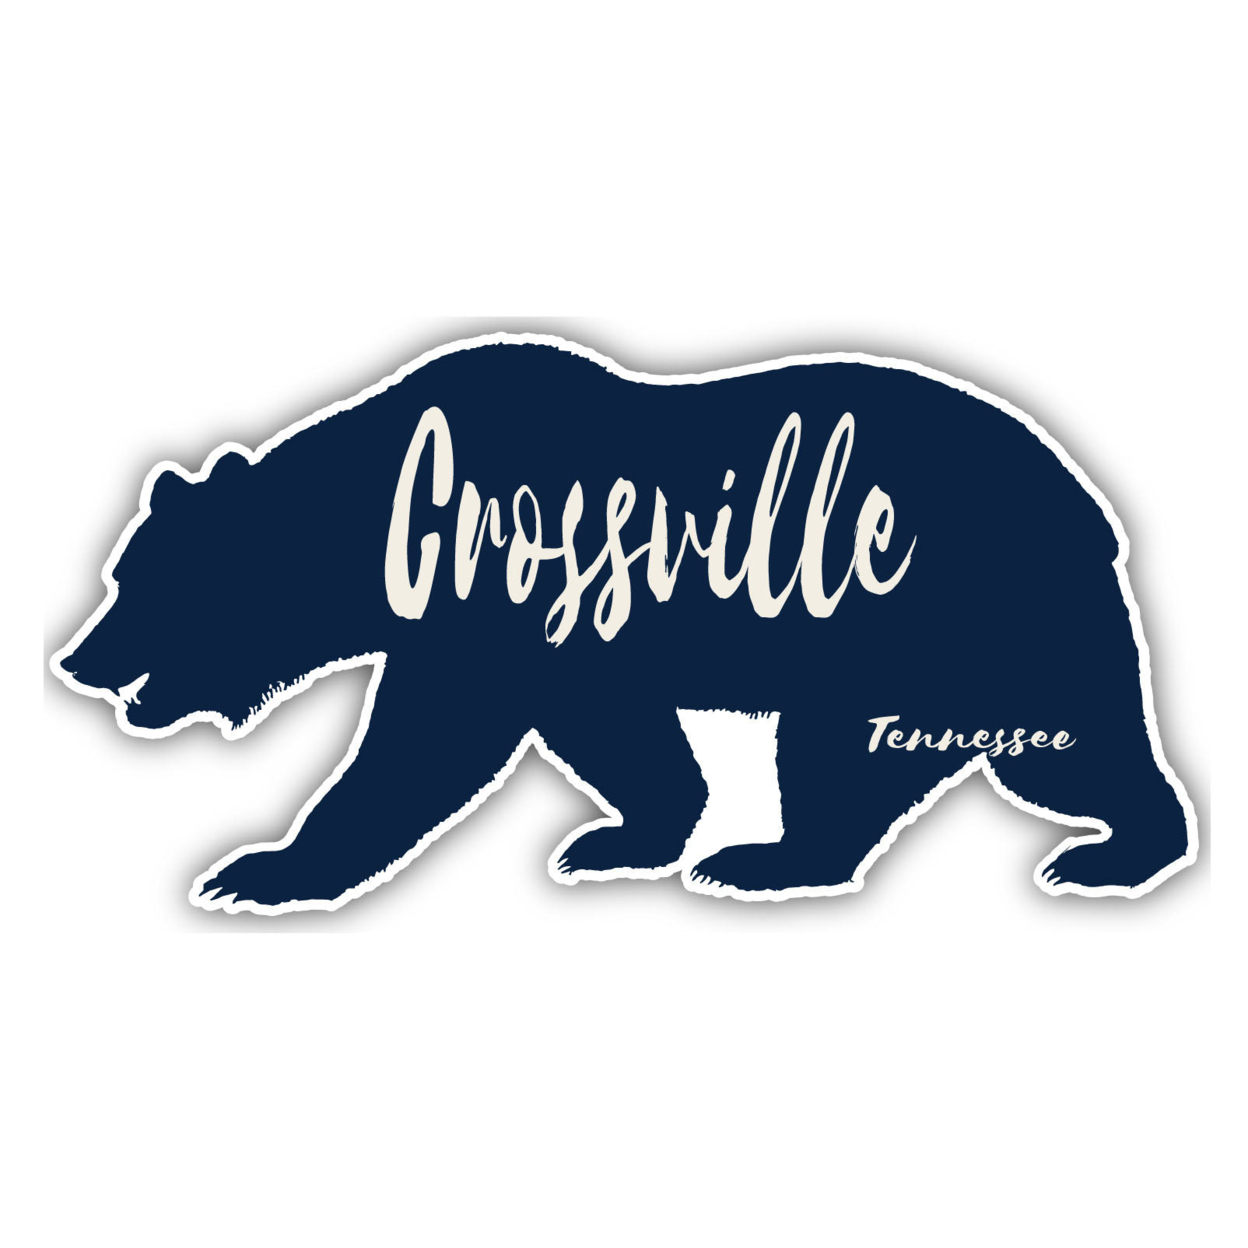 Crossville Tennessee Souvenir Decorative Stickers (Choose Theme And Size) - 4-Pack, 4-Inch, Bear